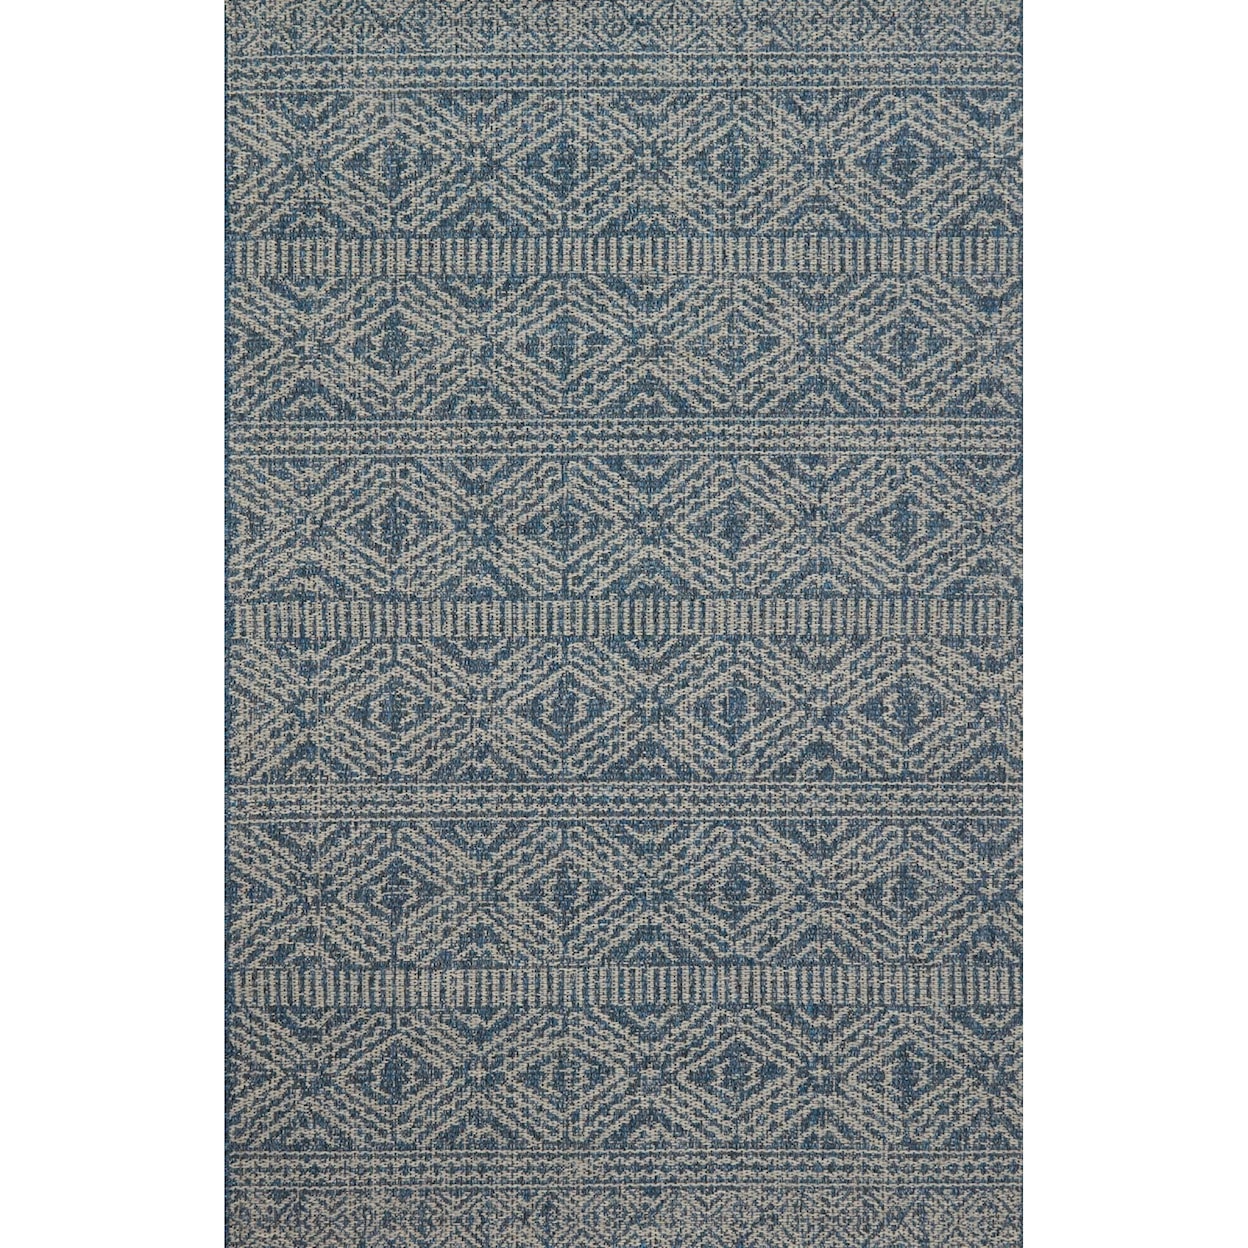 Magnolia Home by Joanna Gaines for Loloi Warwick 4' 11" X 7' 7" Indoor / Outdoor Rug